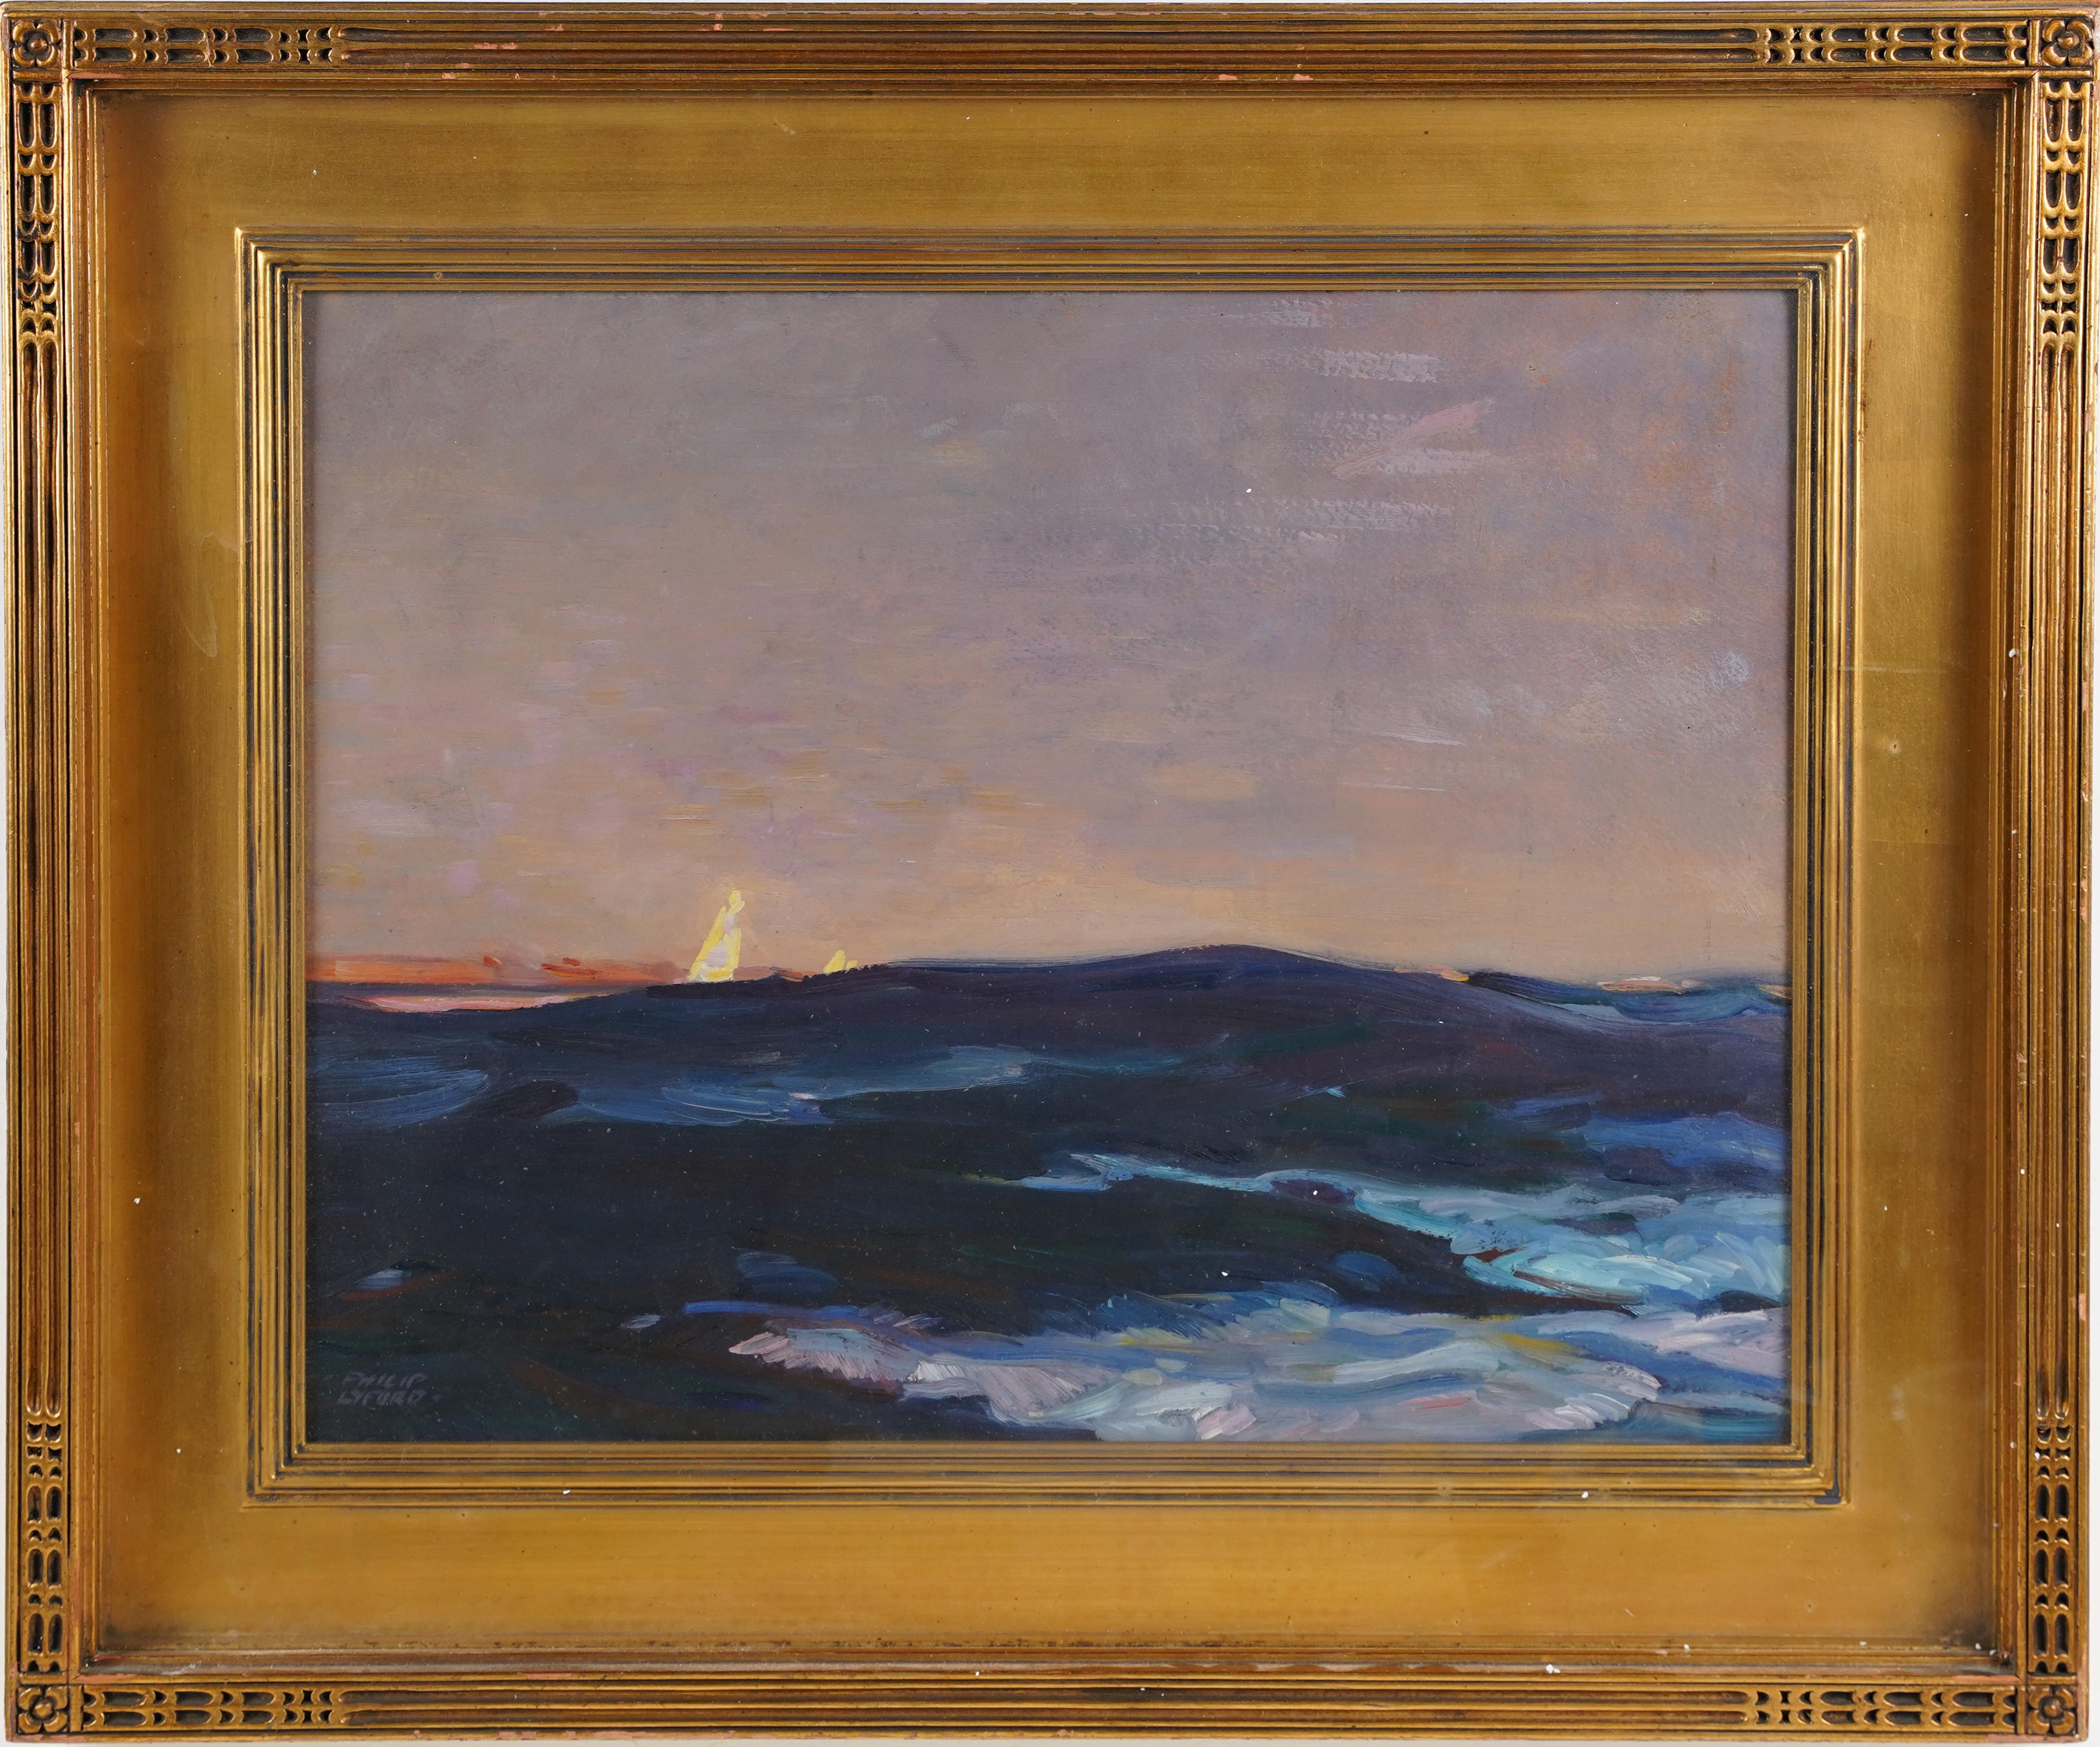 Unknown Landscape Painting - Antique American Impressionist Ocean Study Sunset Coastal Framed Oil Painting